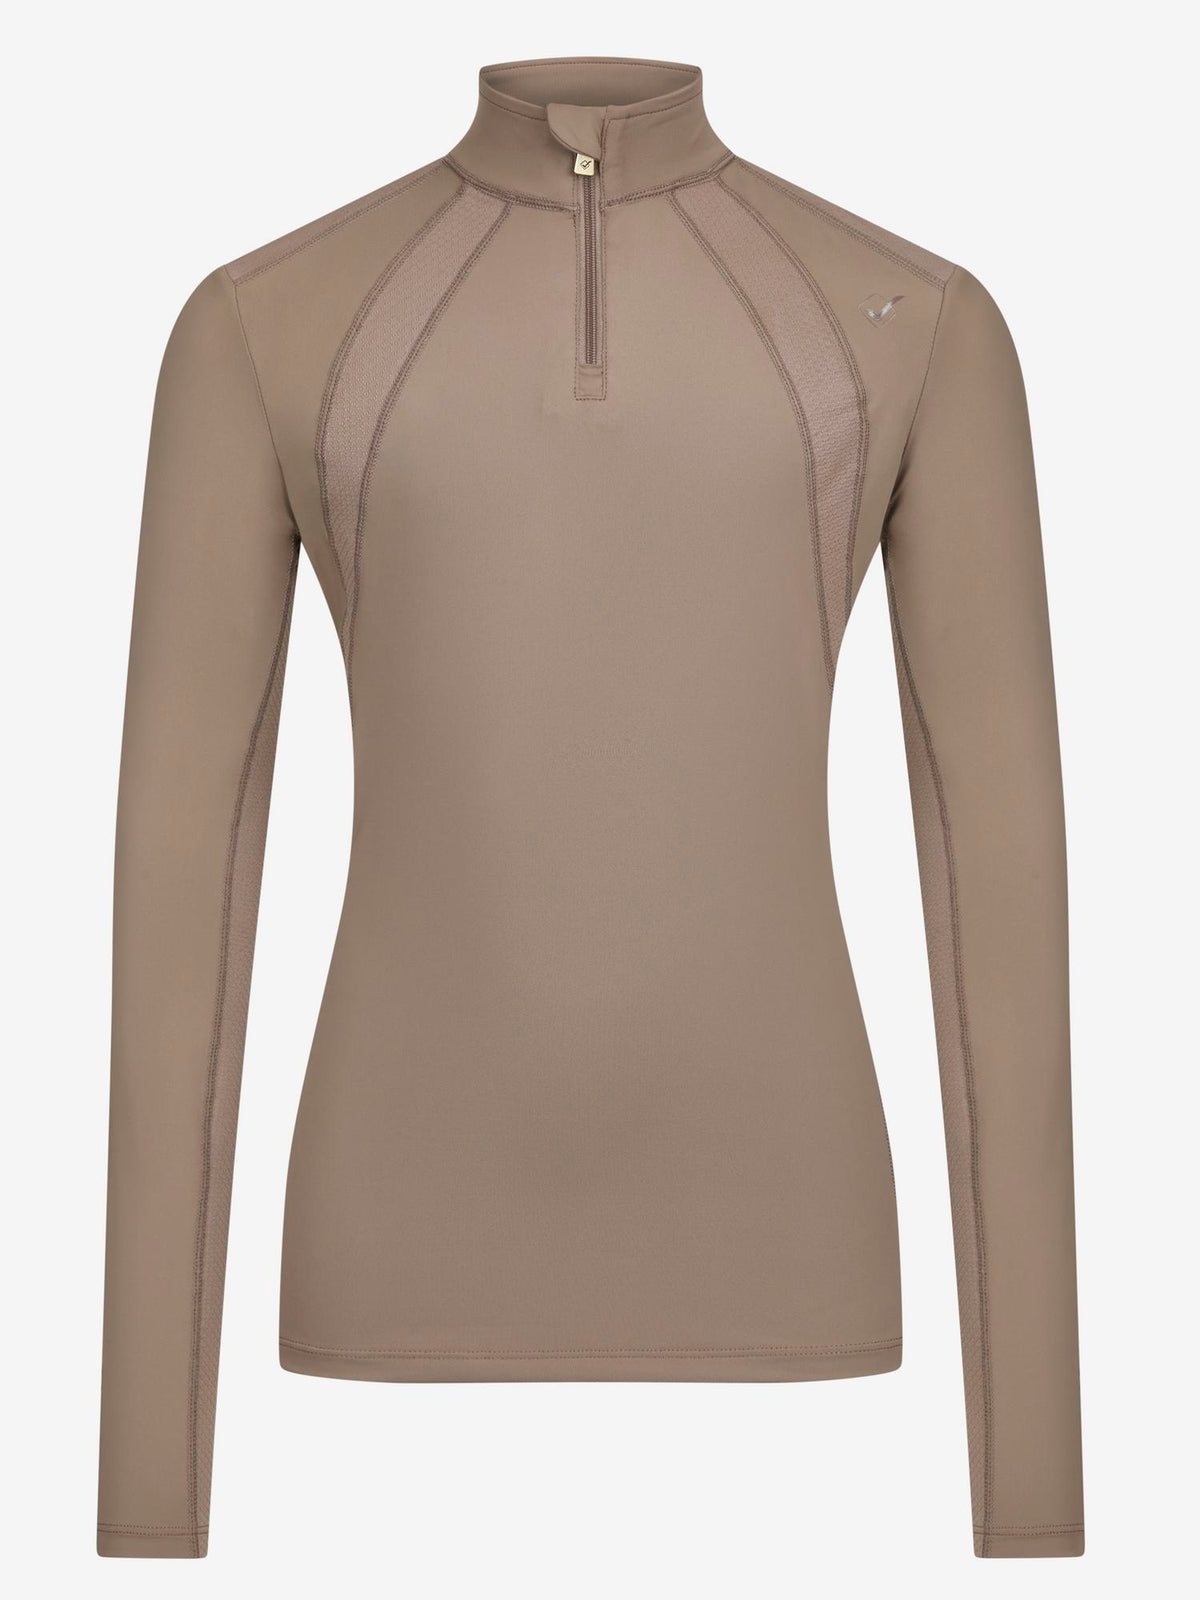 LeMieux Young Riders Mia Mesh Base Layer